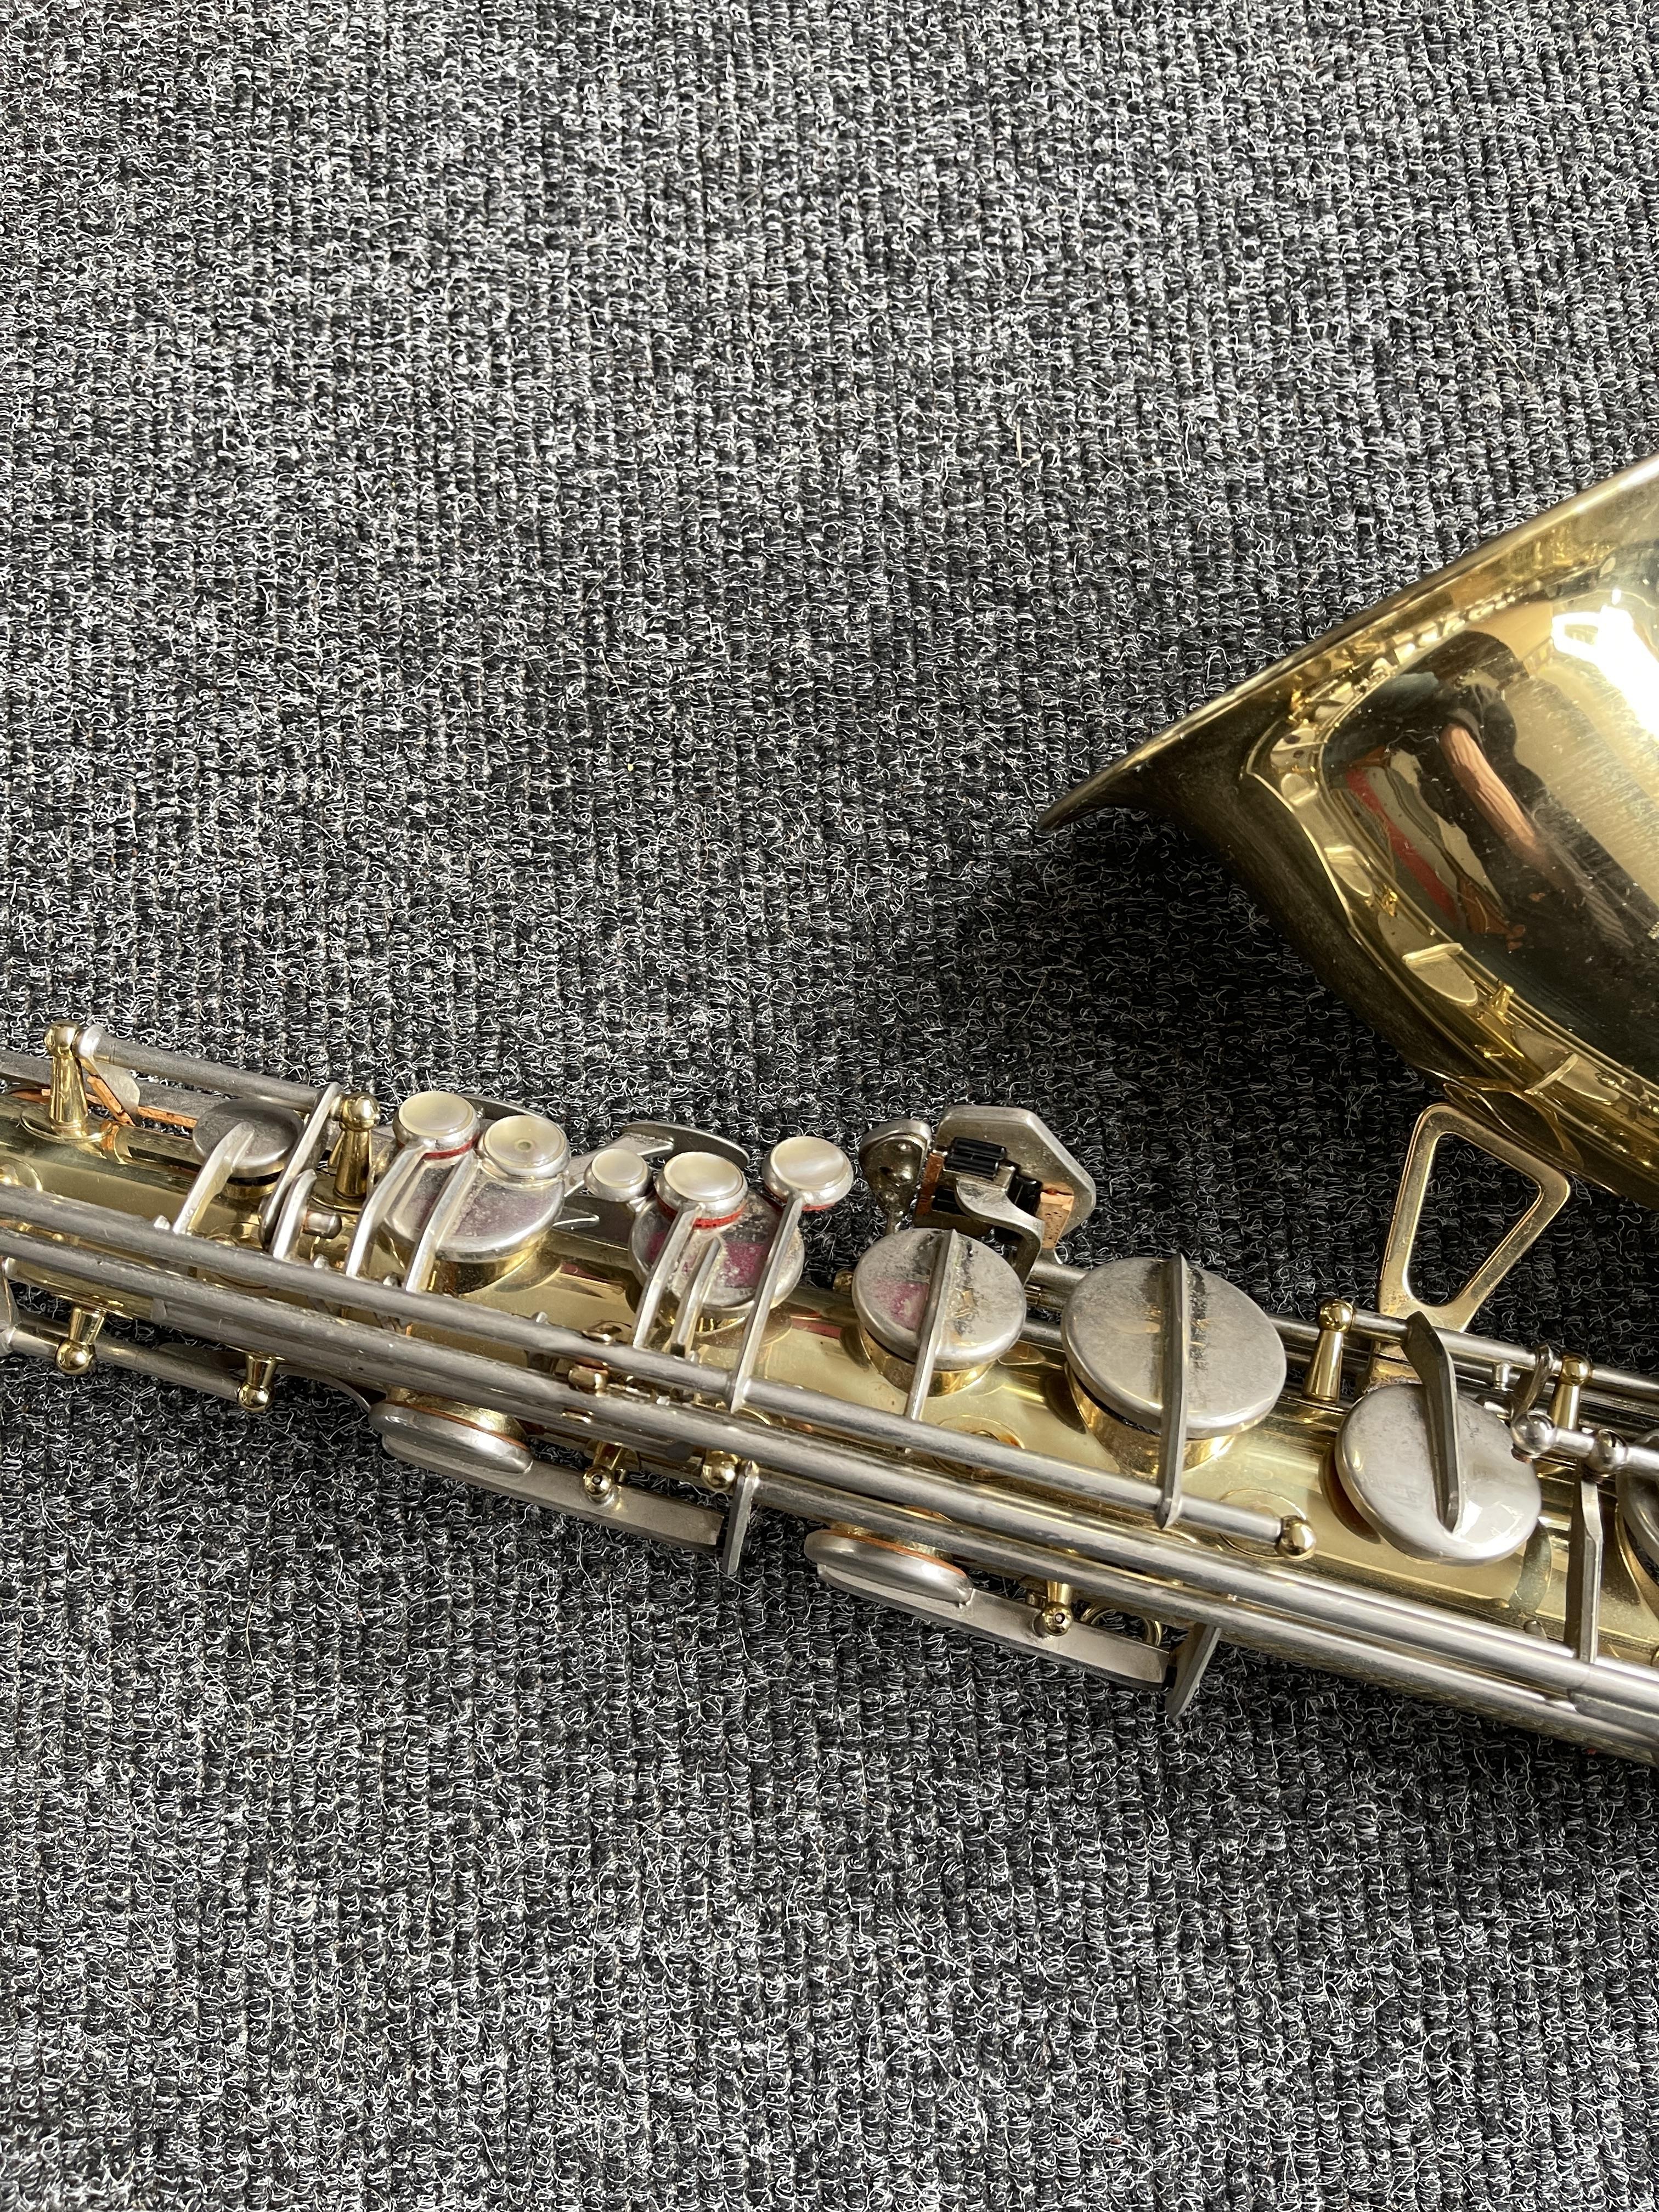 B&H 400 made for Boosey & Hawkes Cased Saxophone. - Image 6 of 31